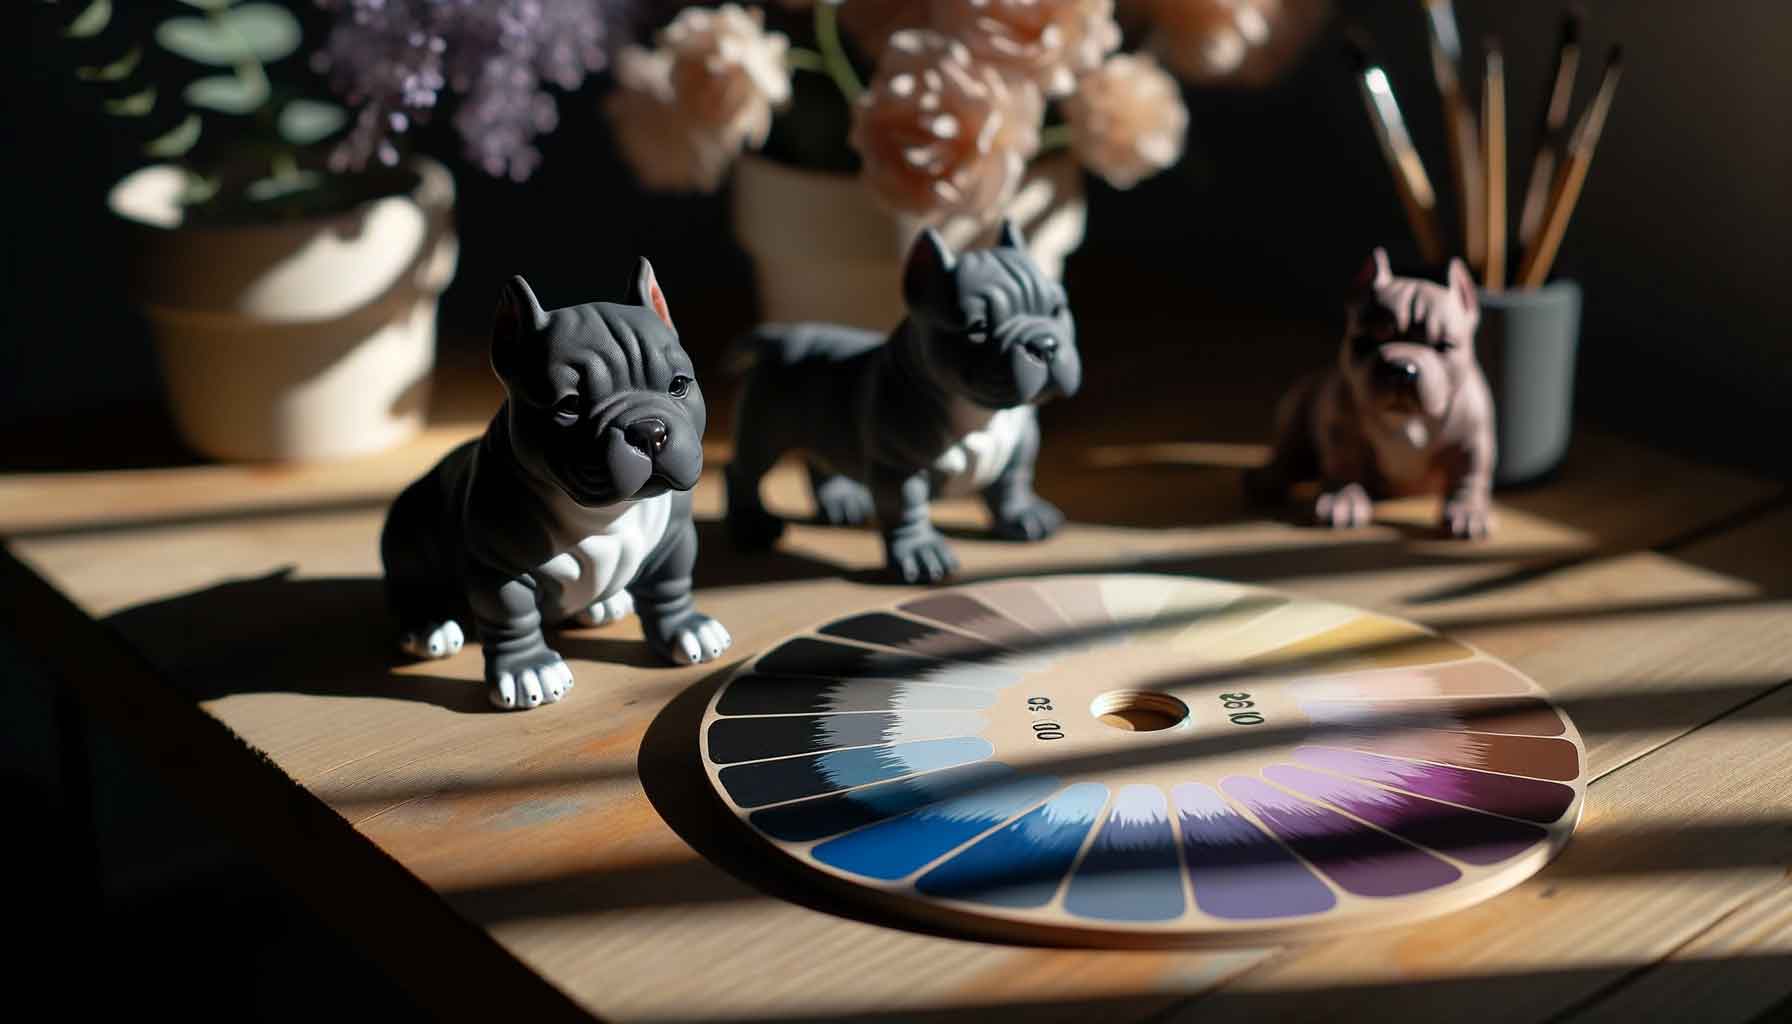 A palette showcasing the various coat colors of Micro Bullies, accompanied by a Micro Bully figurine, illuminated by natural sunlight on a wooden table.